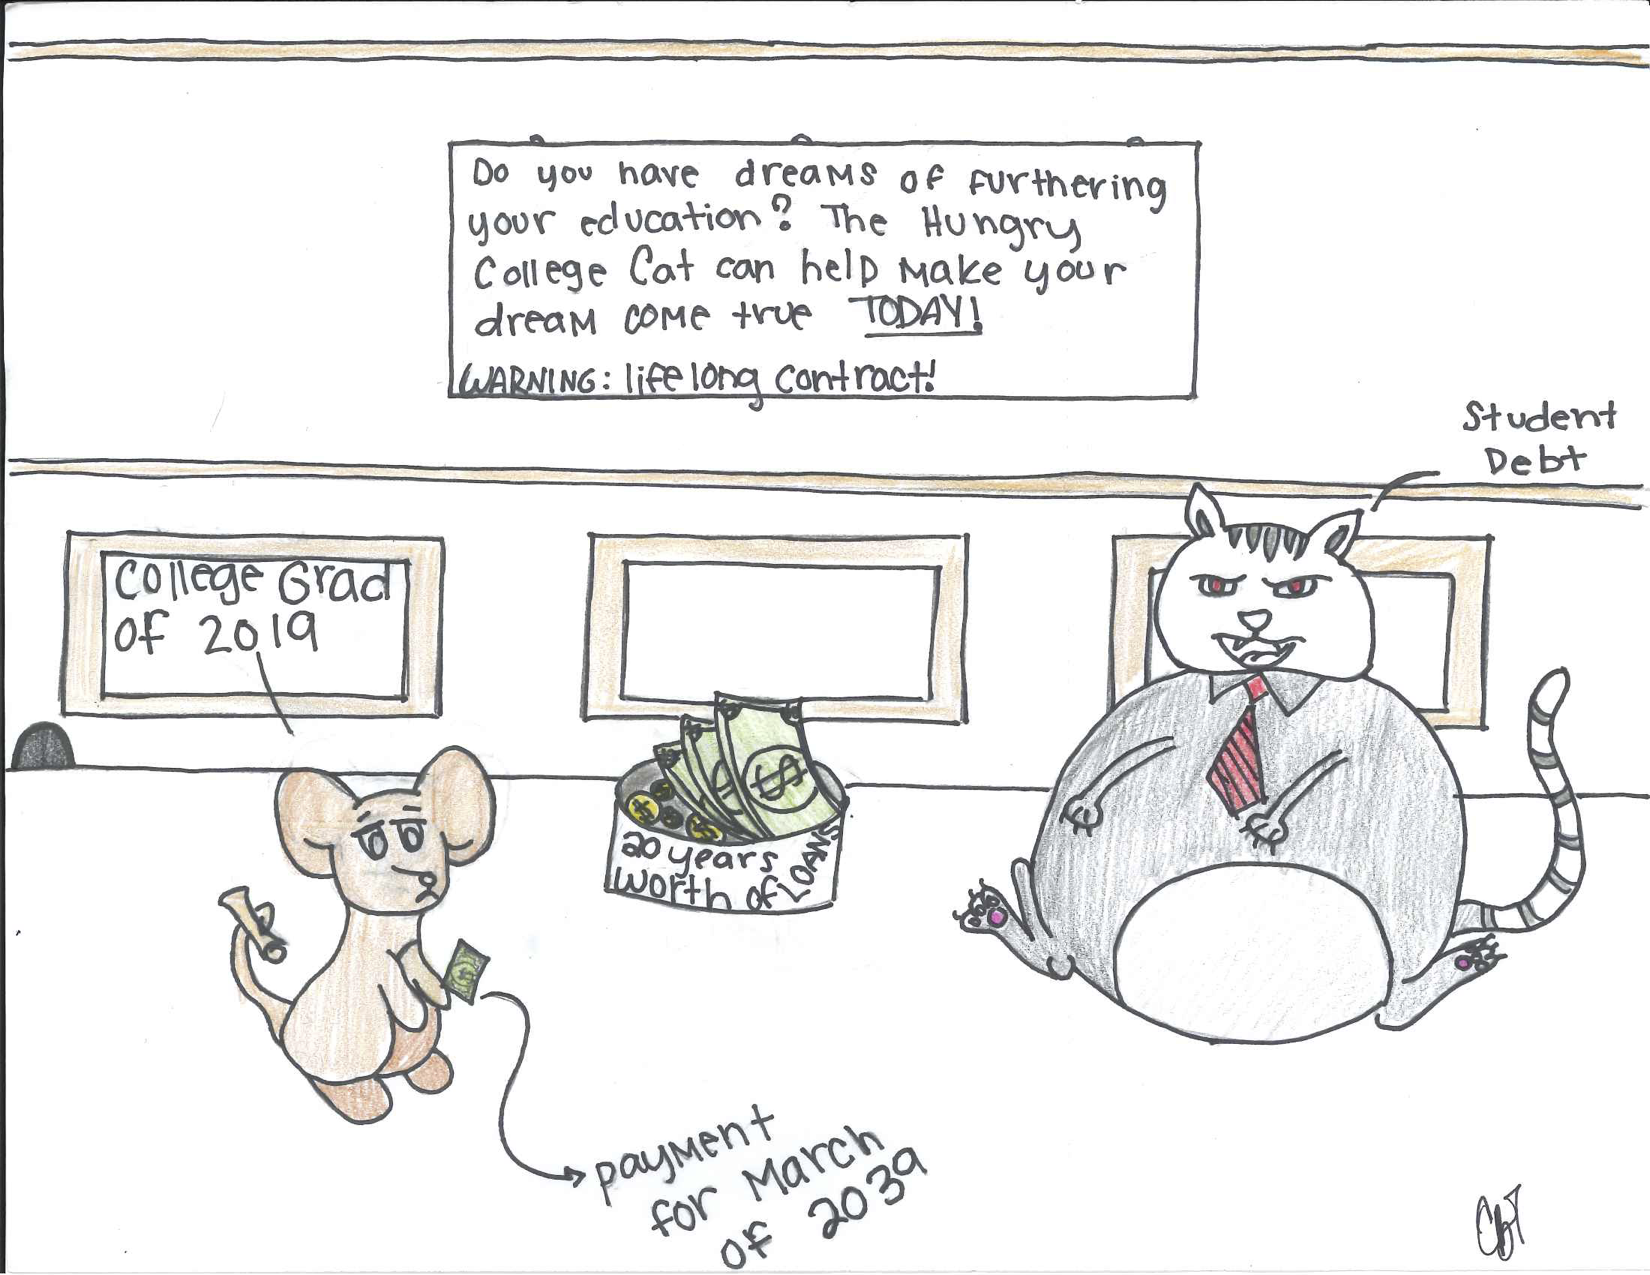 Editorial Cartoon: “The Hungry College Cat”